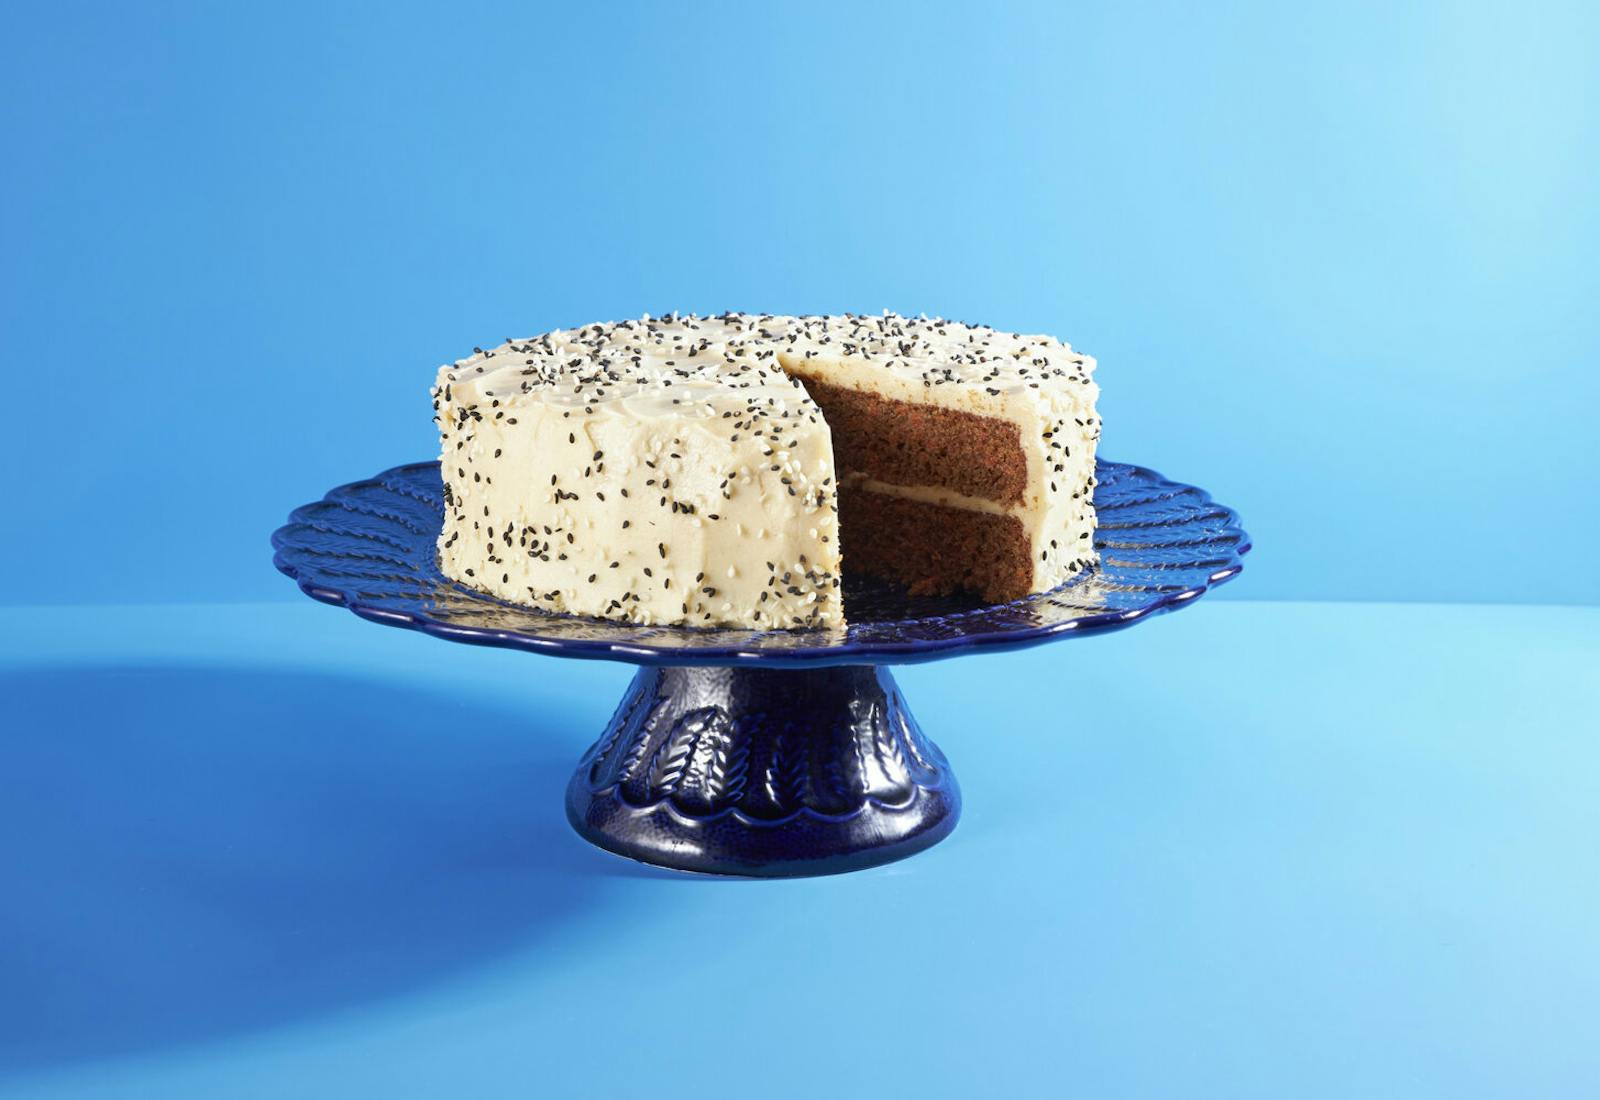 Tahini carrot cake with frosting and black and white sesame seeds on blue cake platter, blue background. 